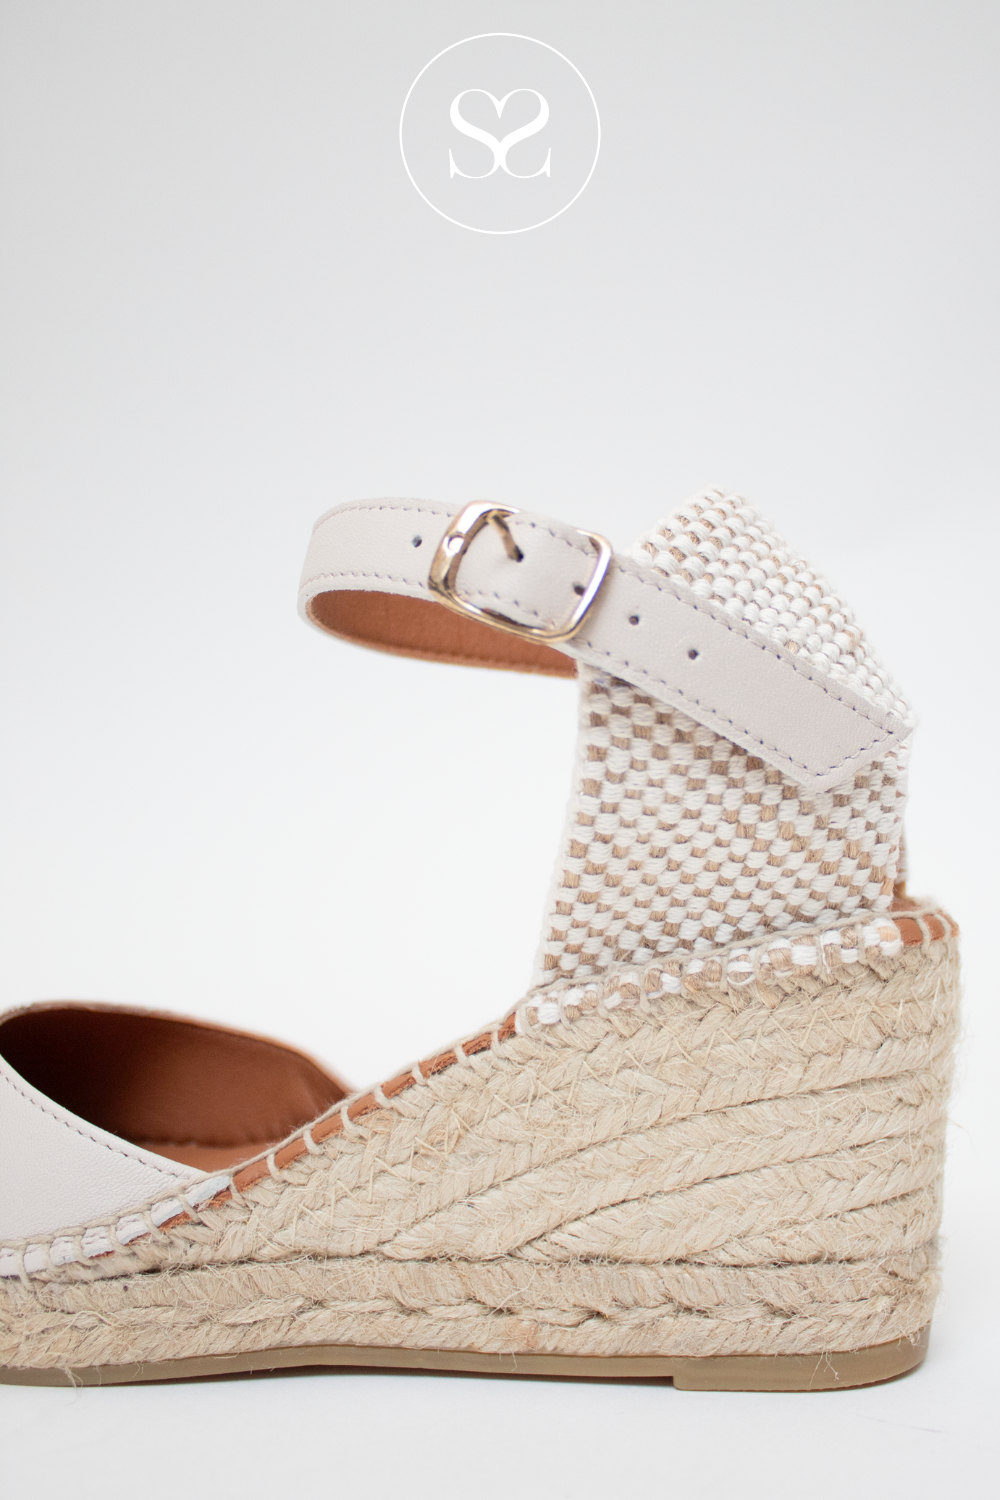 VIGUERA 1743 CREAM LEATHER LOW WEDGE ESPADRILLE WITH BUCKLE STRAP AT FRONT